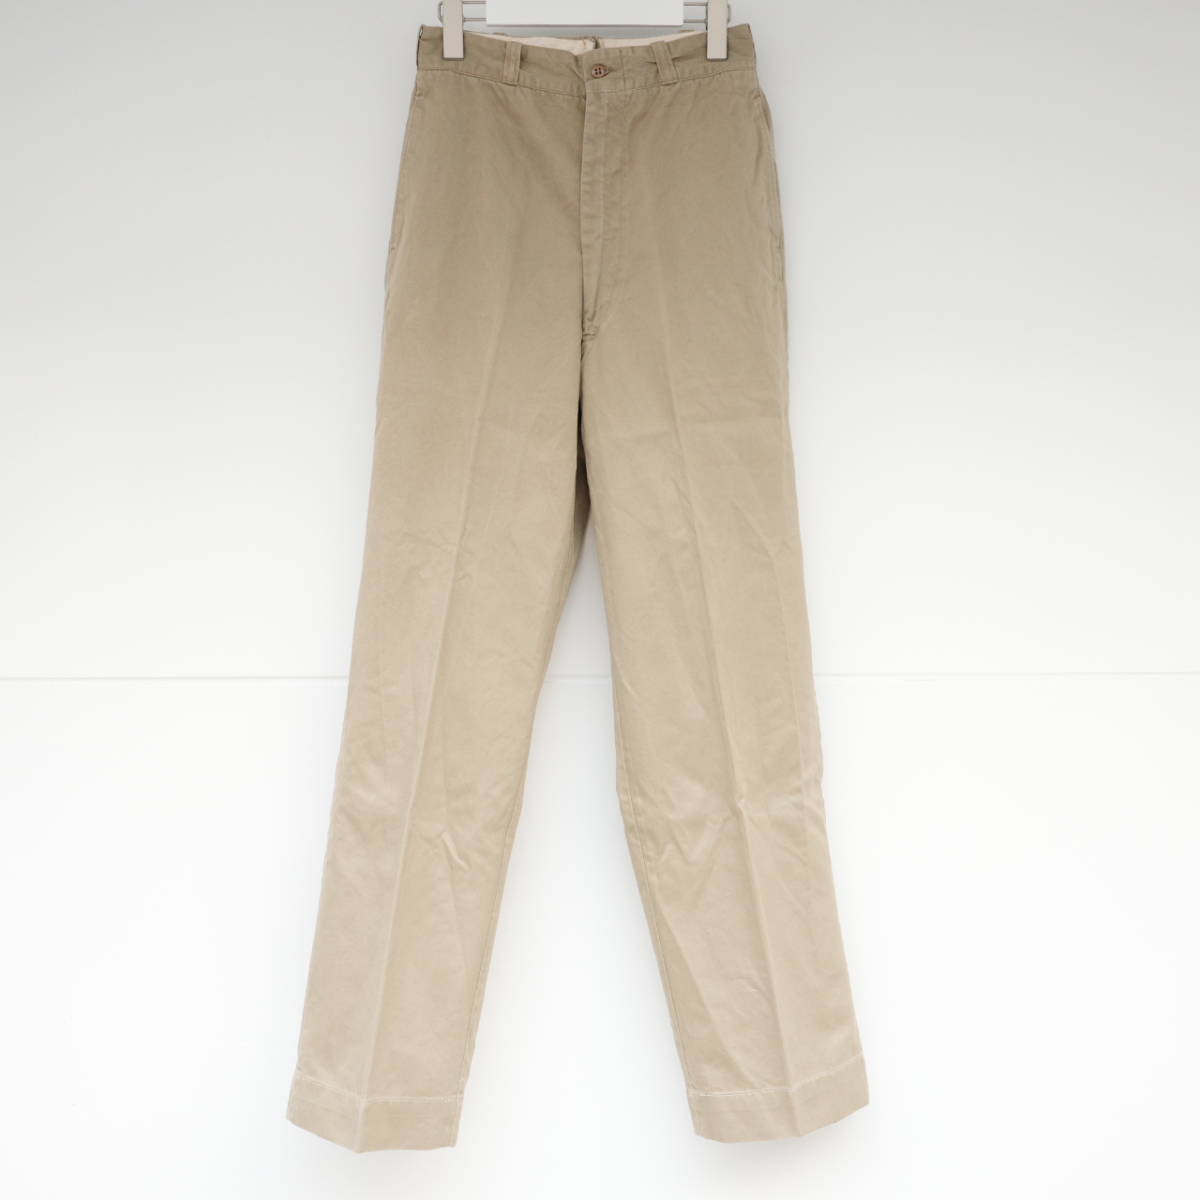 60s vintage U.S. ARMY type1 Chino twill trousers W29L35 ヴィンテージ ミリタリー チノ トラウザーズ